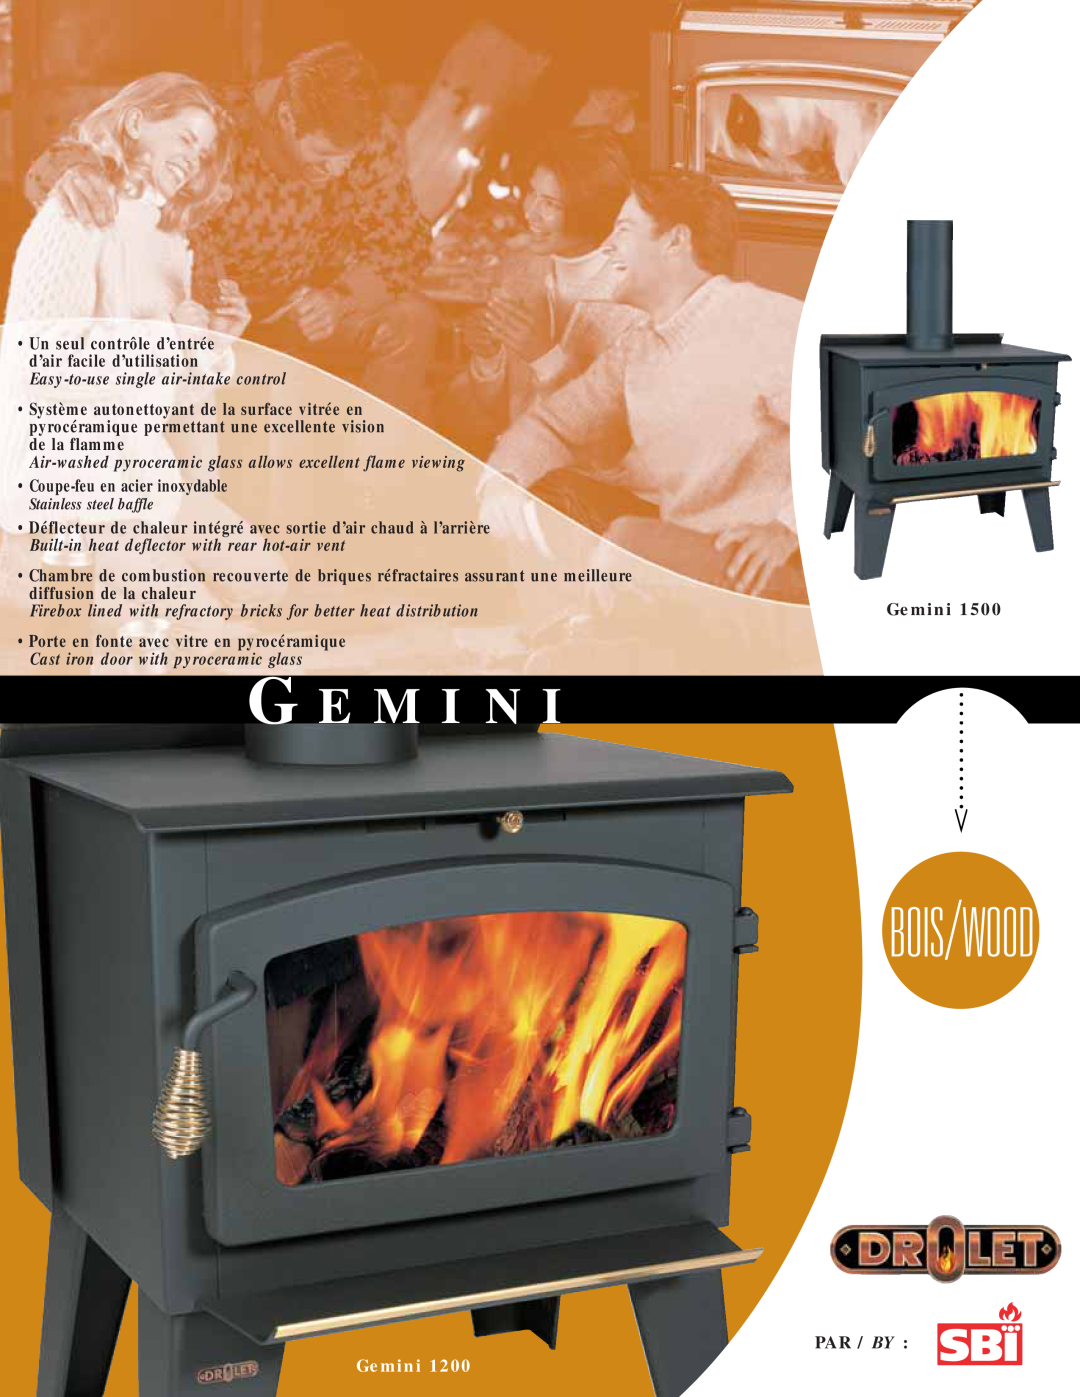 Drolet gemini 1500 manual Par / By, G E M I N, Air-washed pyroceramic glass allows excellent flame viewing, Gemini 